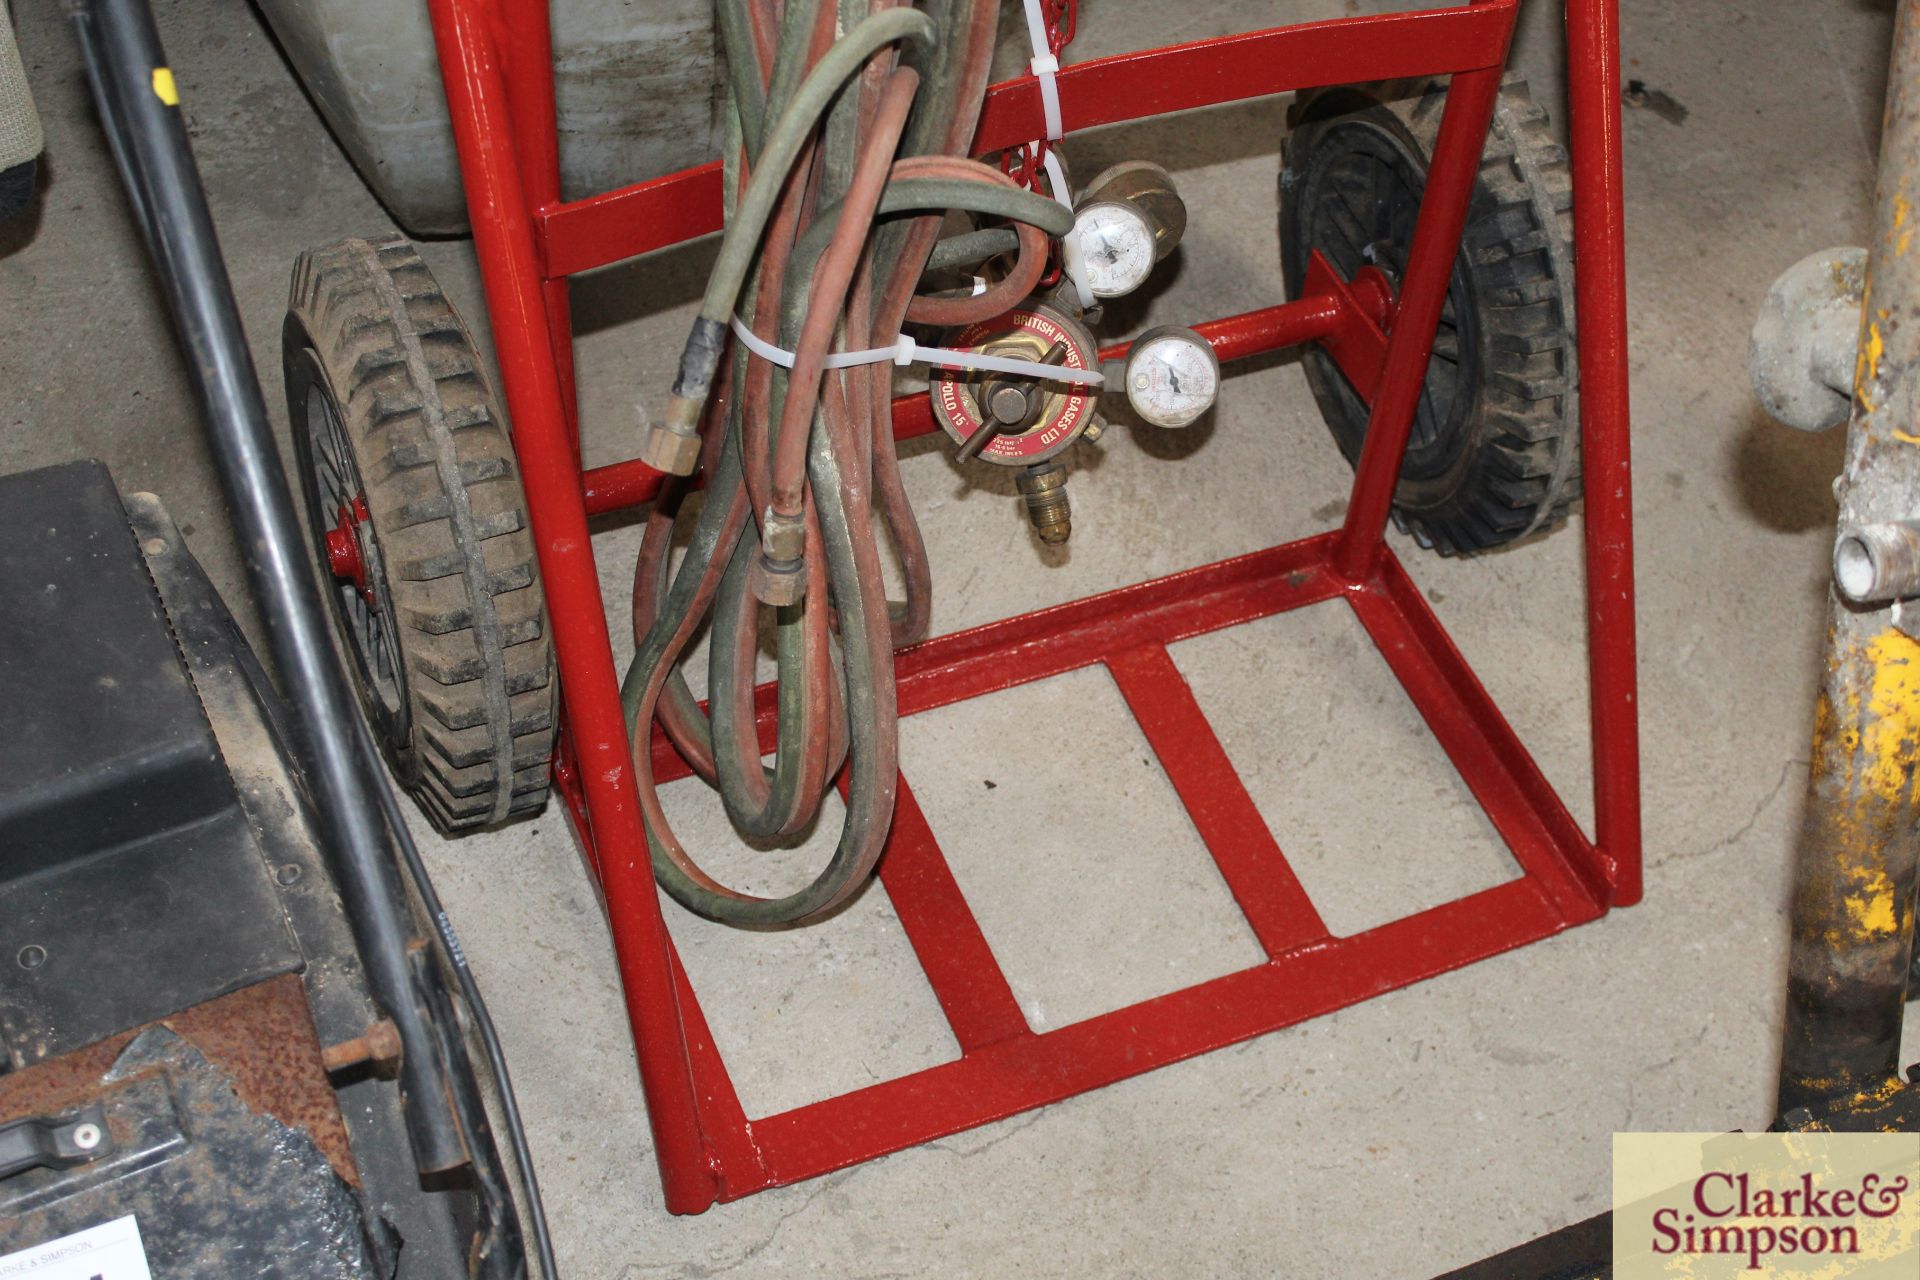 Welding trolley with hoses and gauges. - Image 2 of 4